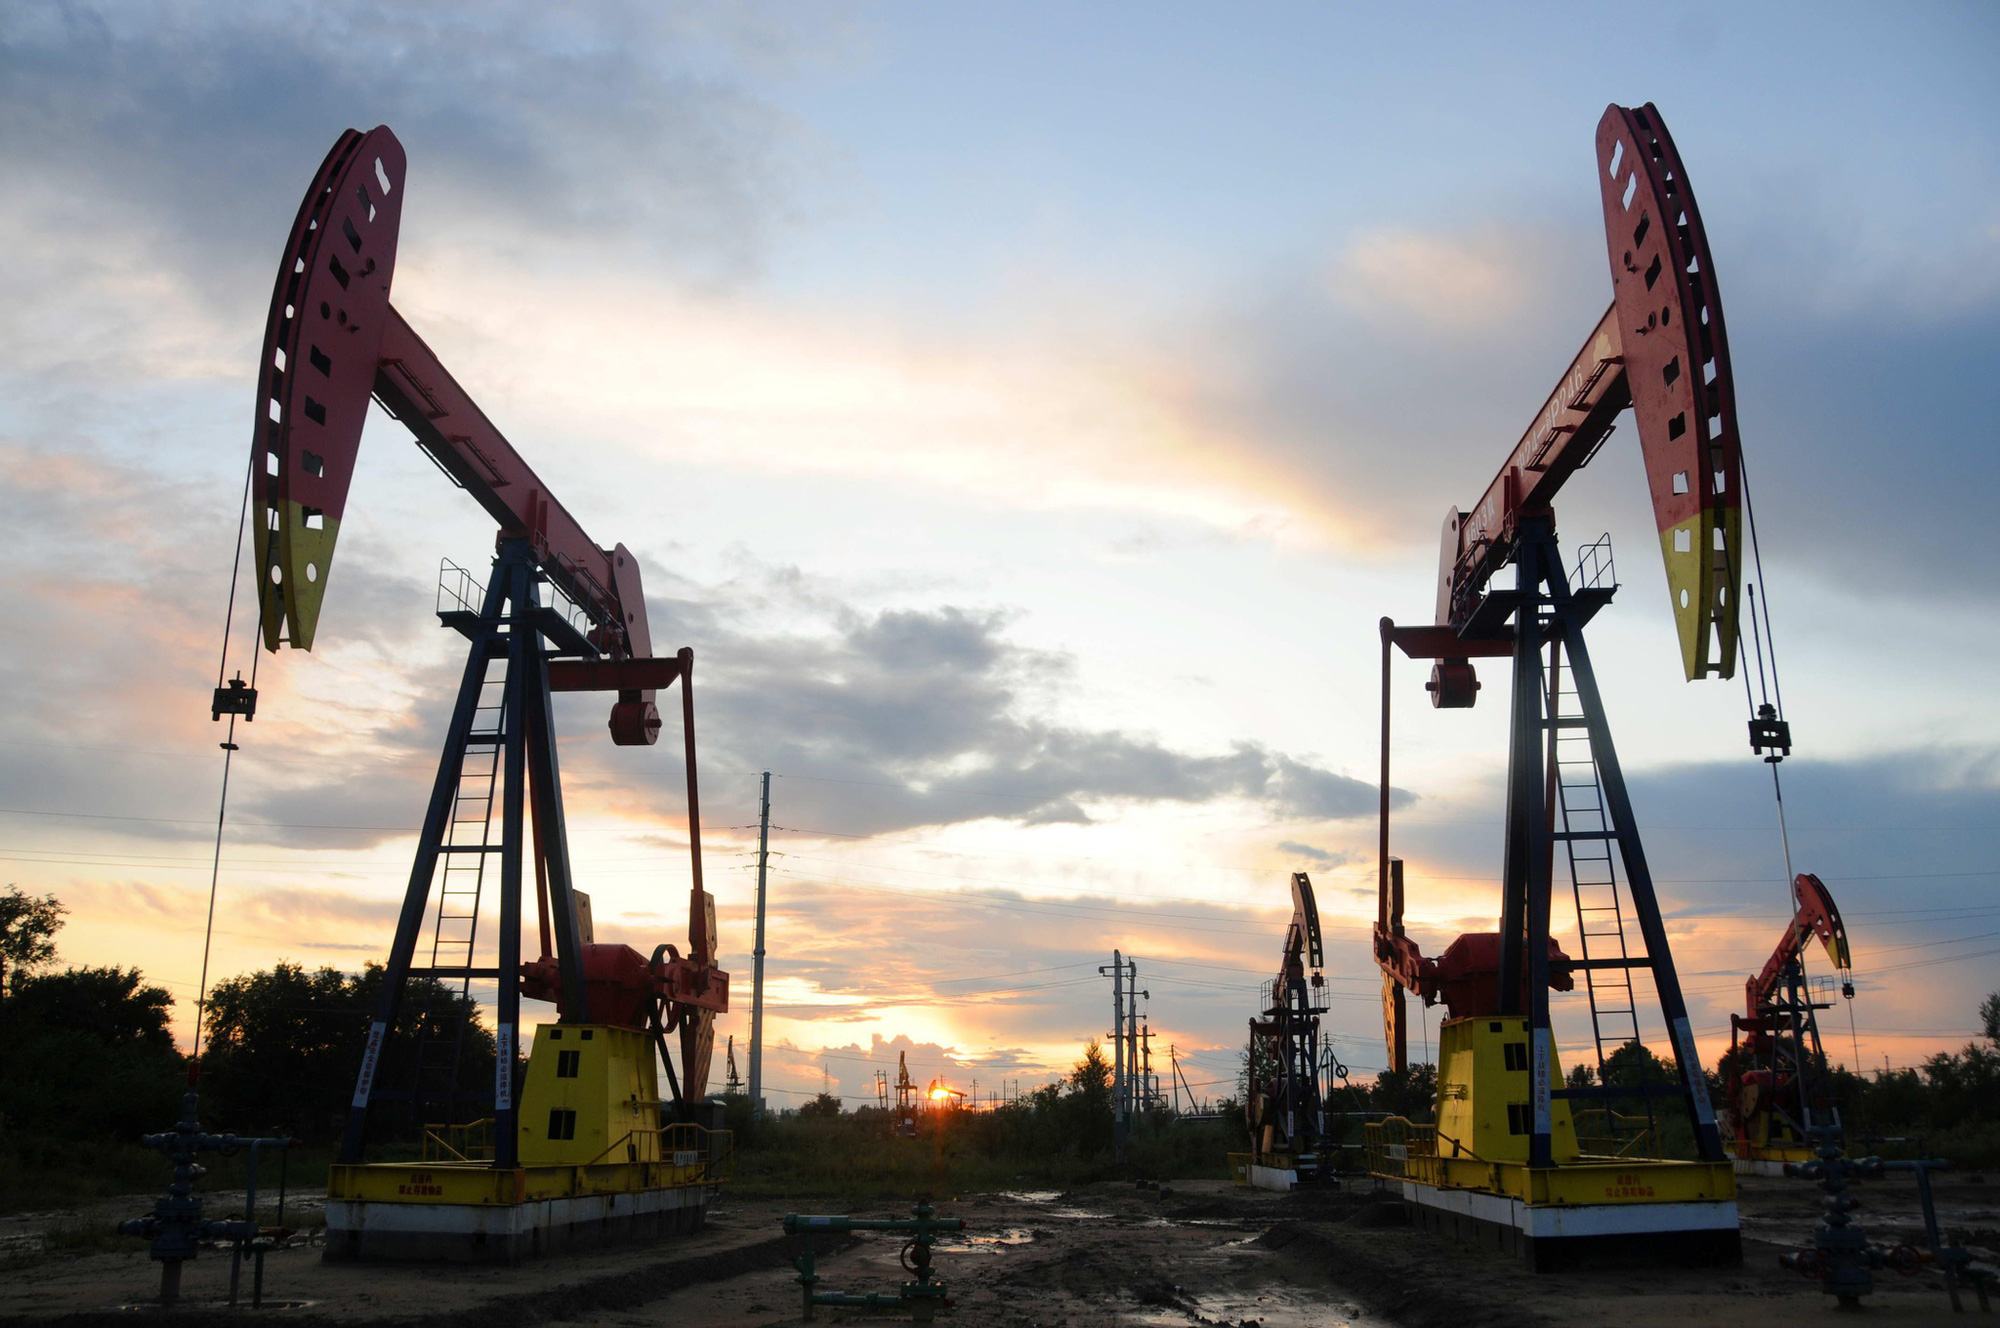 pumpjacks-are-seen-during-sunset-at-the-daqing-oil-field-in-heilongjiang-province-china-anh-reuters-3859.jpeg